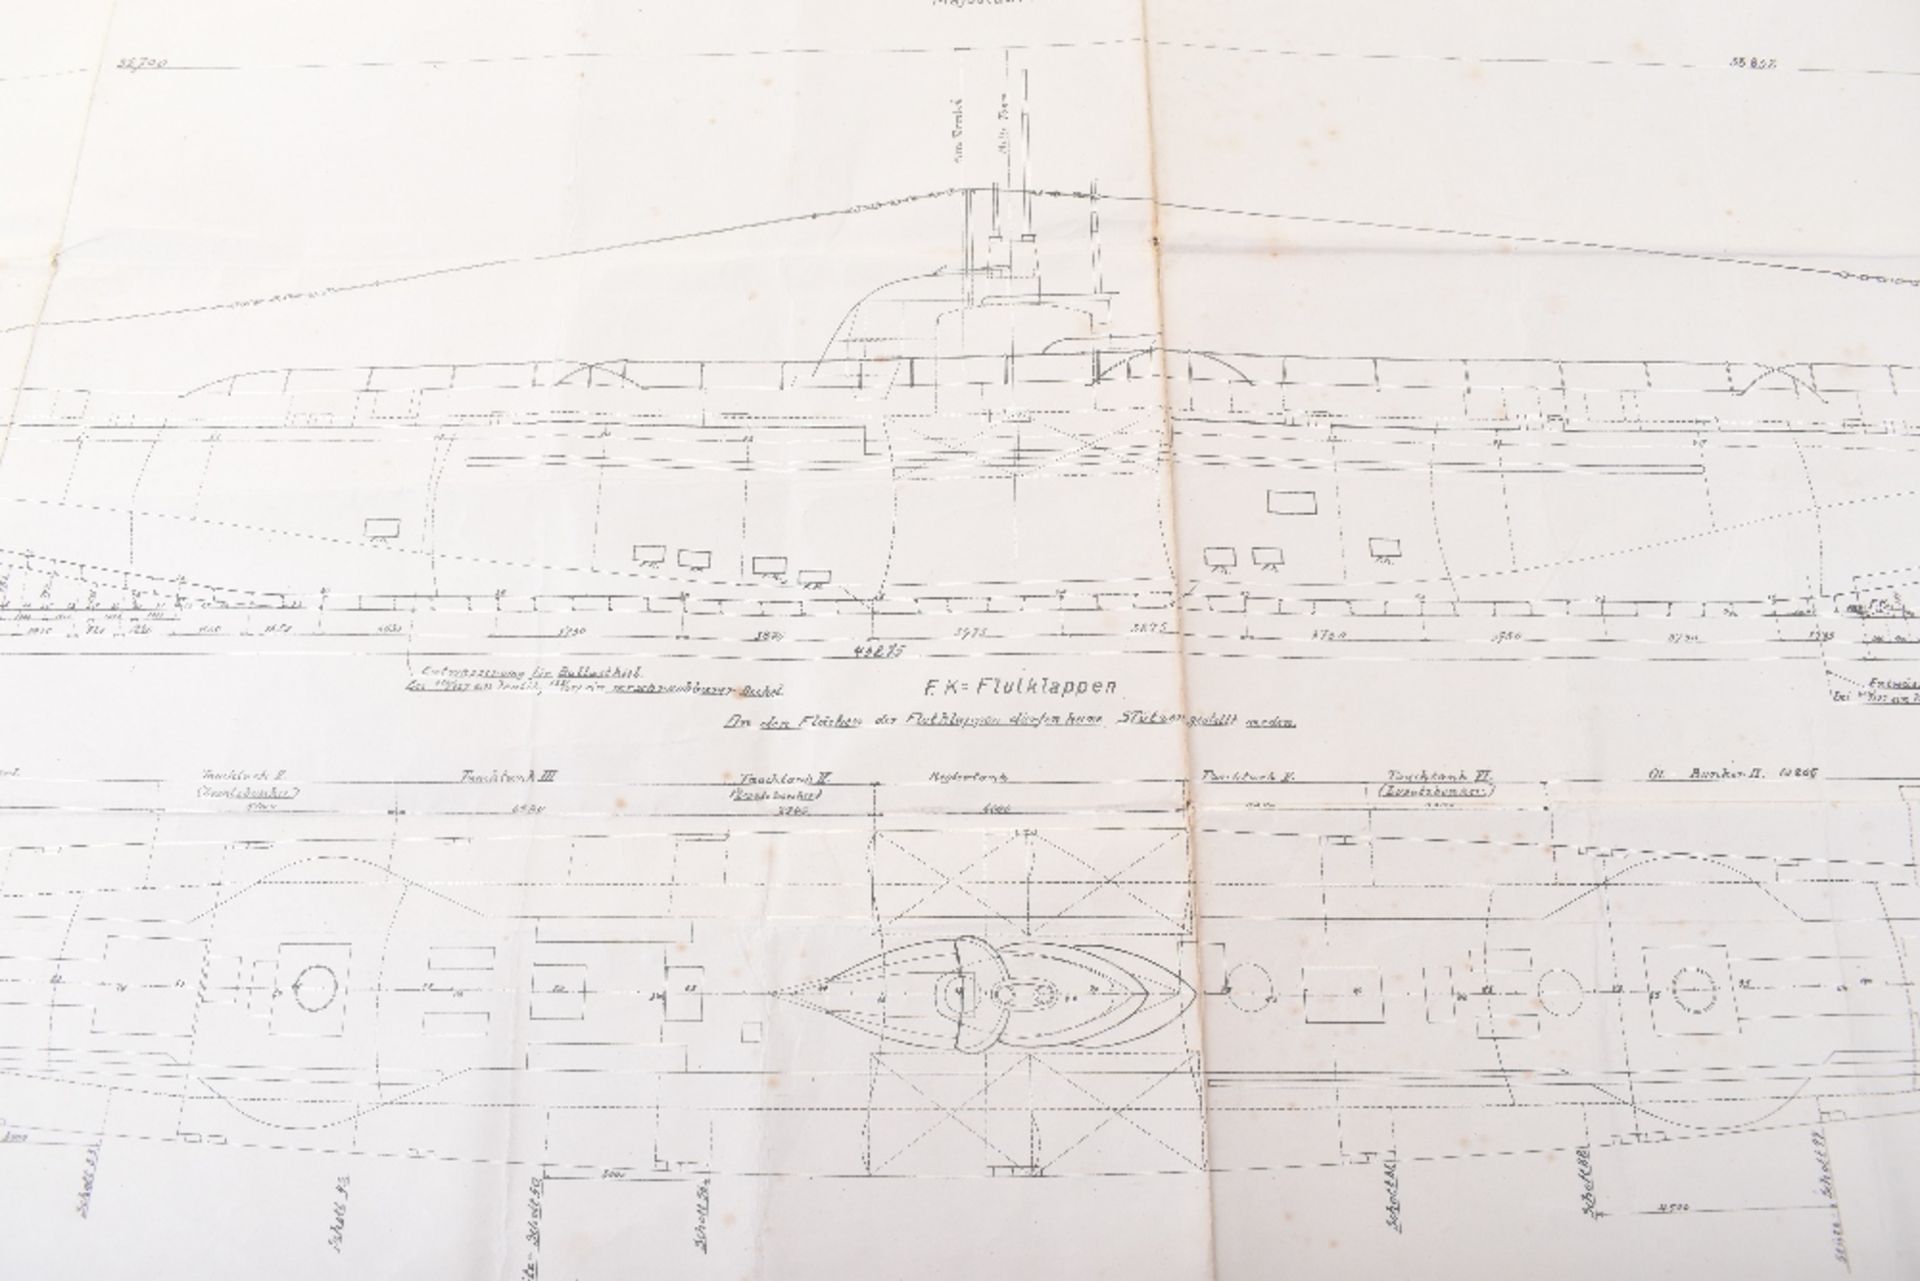 Rare Full Technical Specification Plans of Imperial German U-Boat U-160 - Image 7 of 8